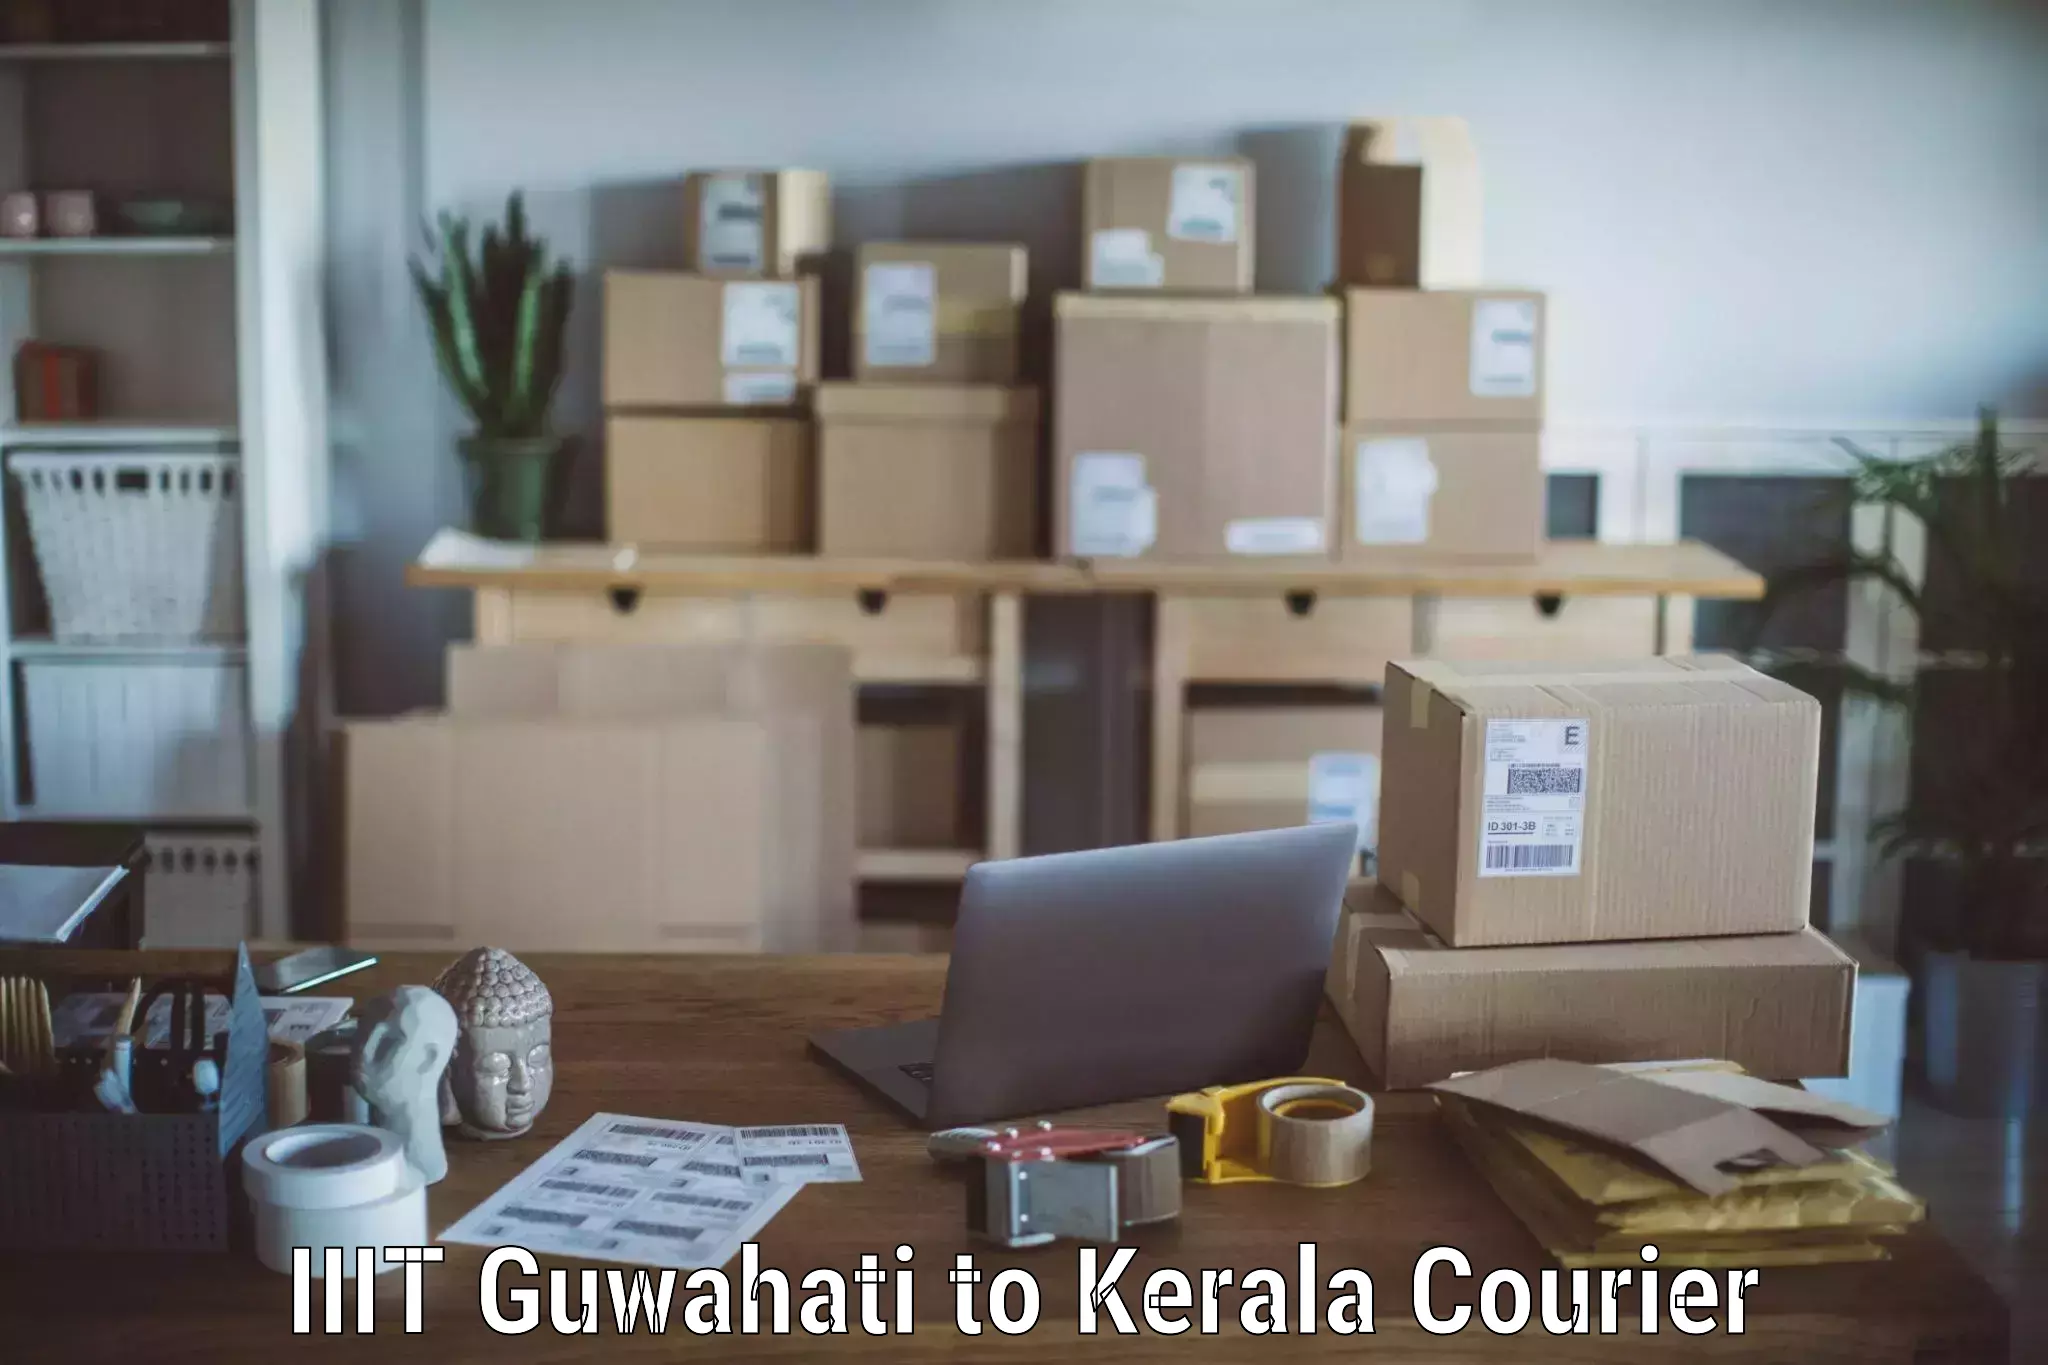 Trusted relocation services IIIT Guwahati to Kottayam